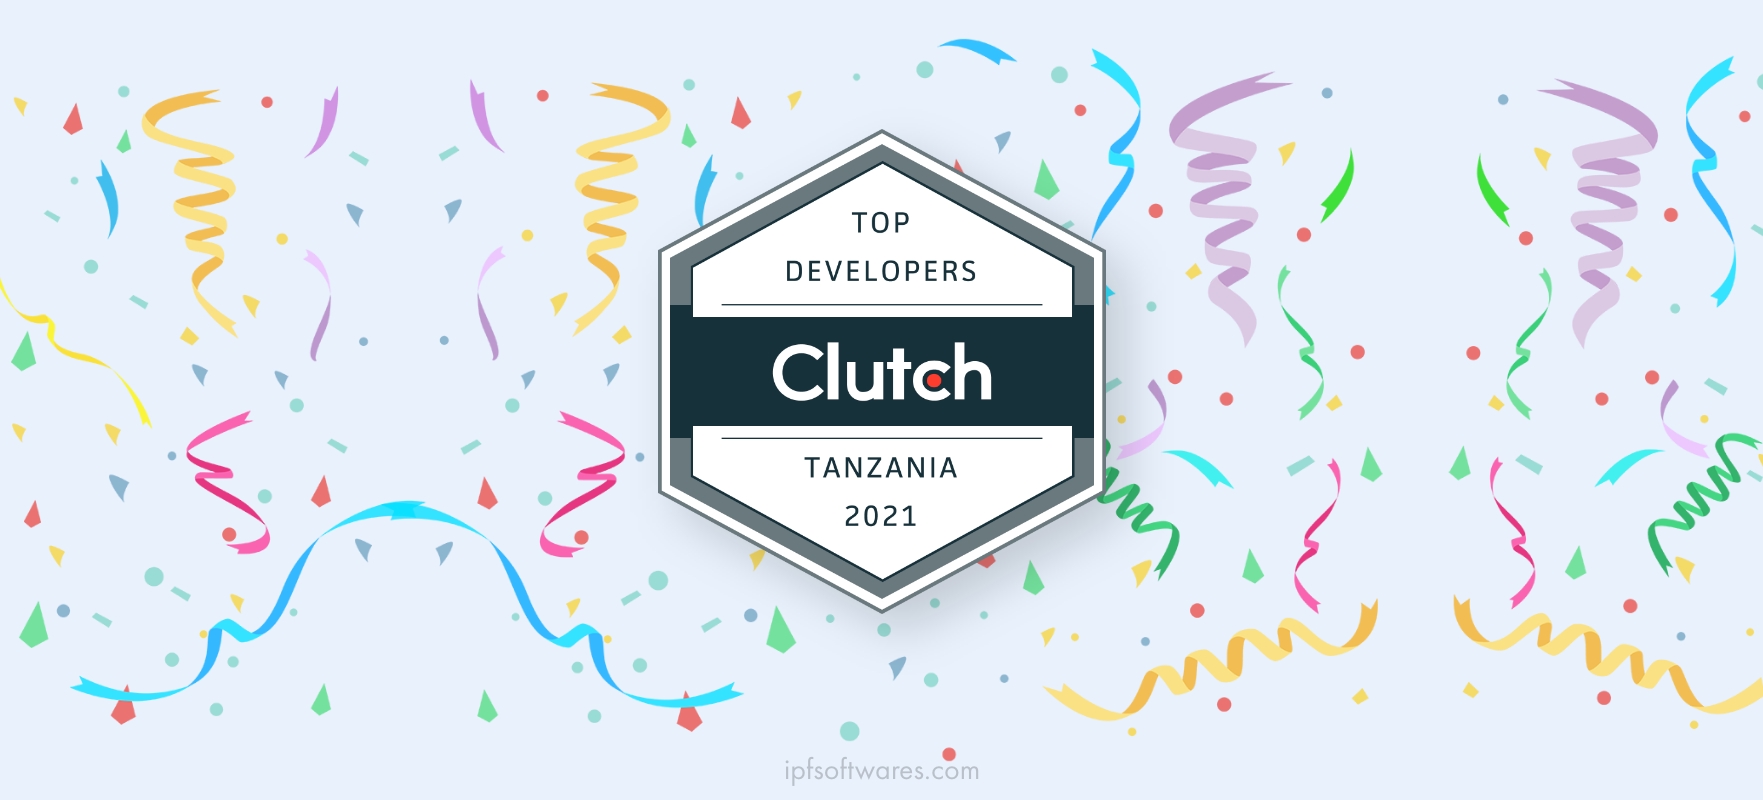  iPF Softwares Awarded by Clutch as Top Software Developers in Tanzania 